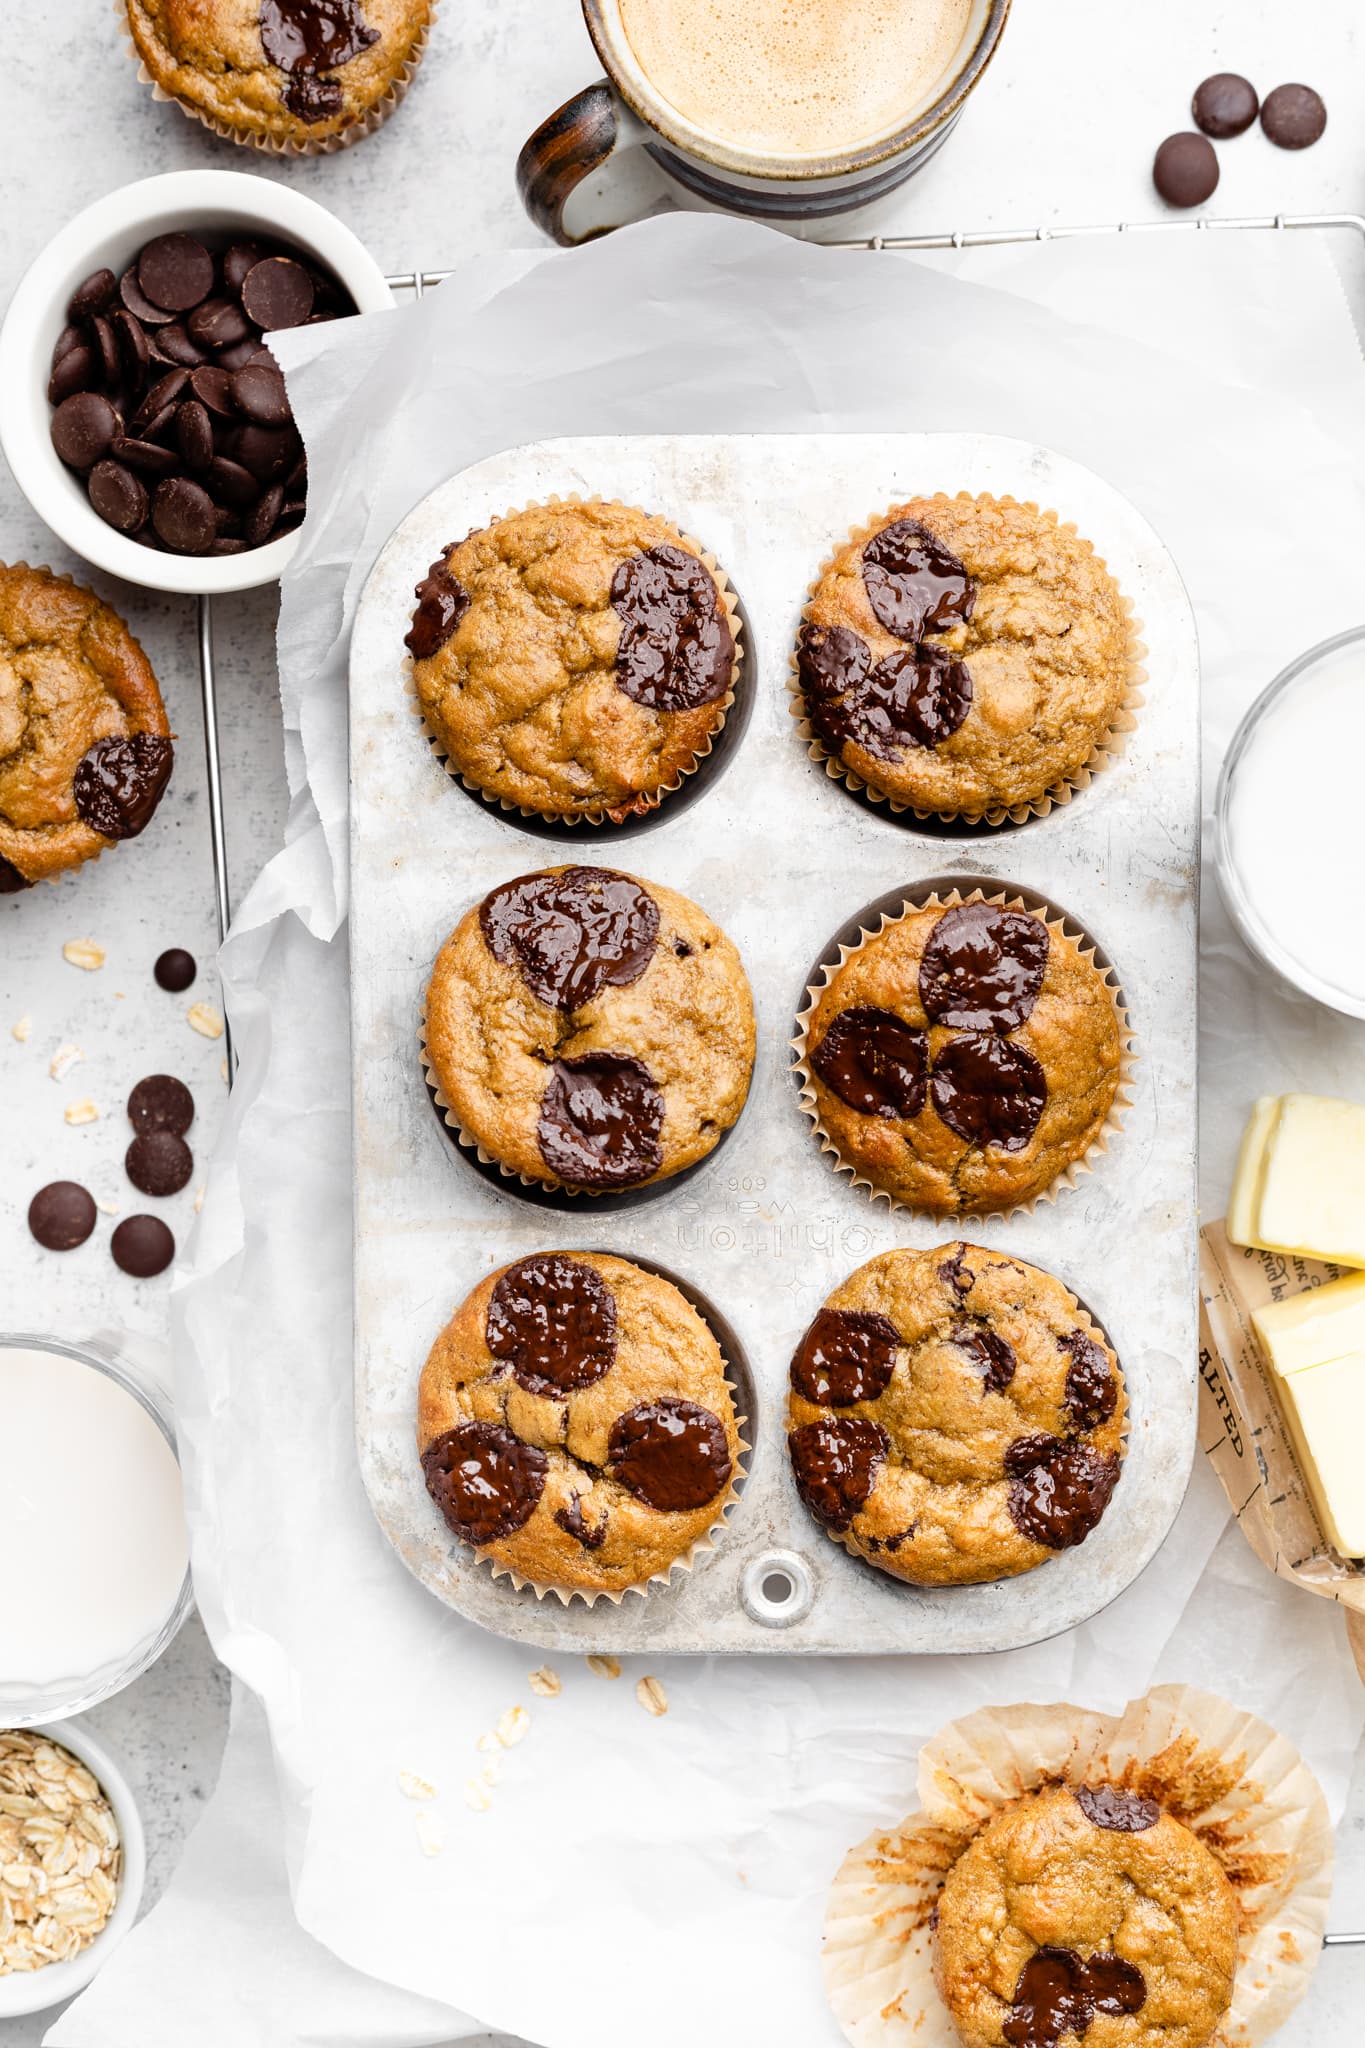 https://allthehealthythings.com/wp-content/uploads/2021/05/healthy-banana-chocolate-chip-muffins-4.jpg